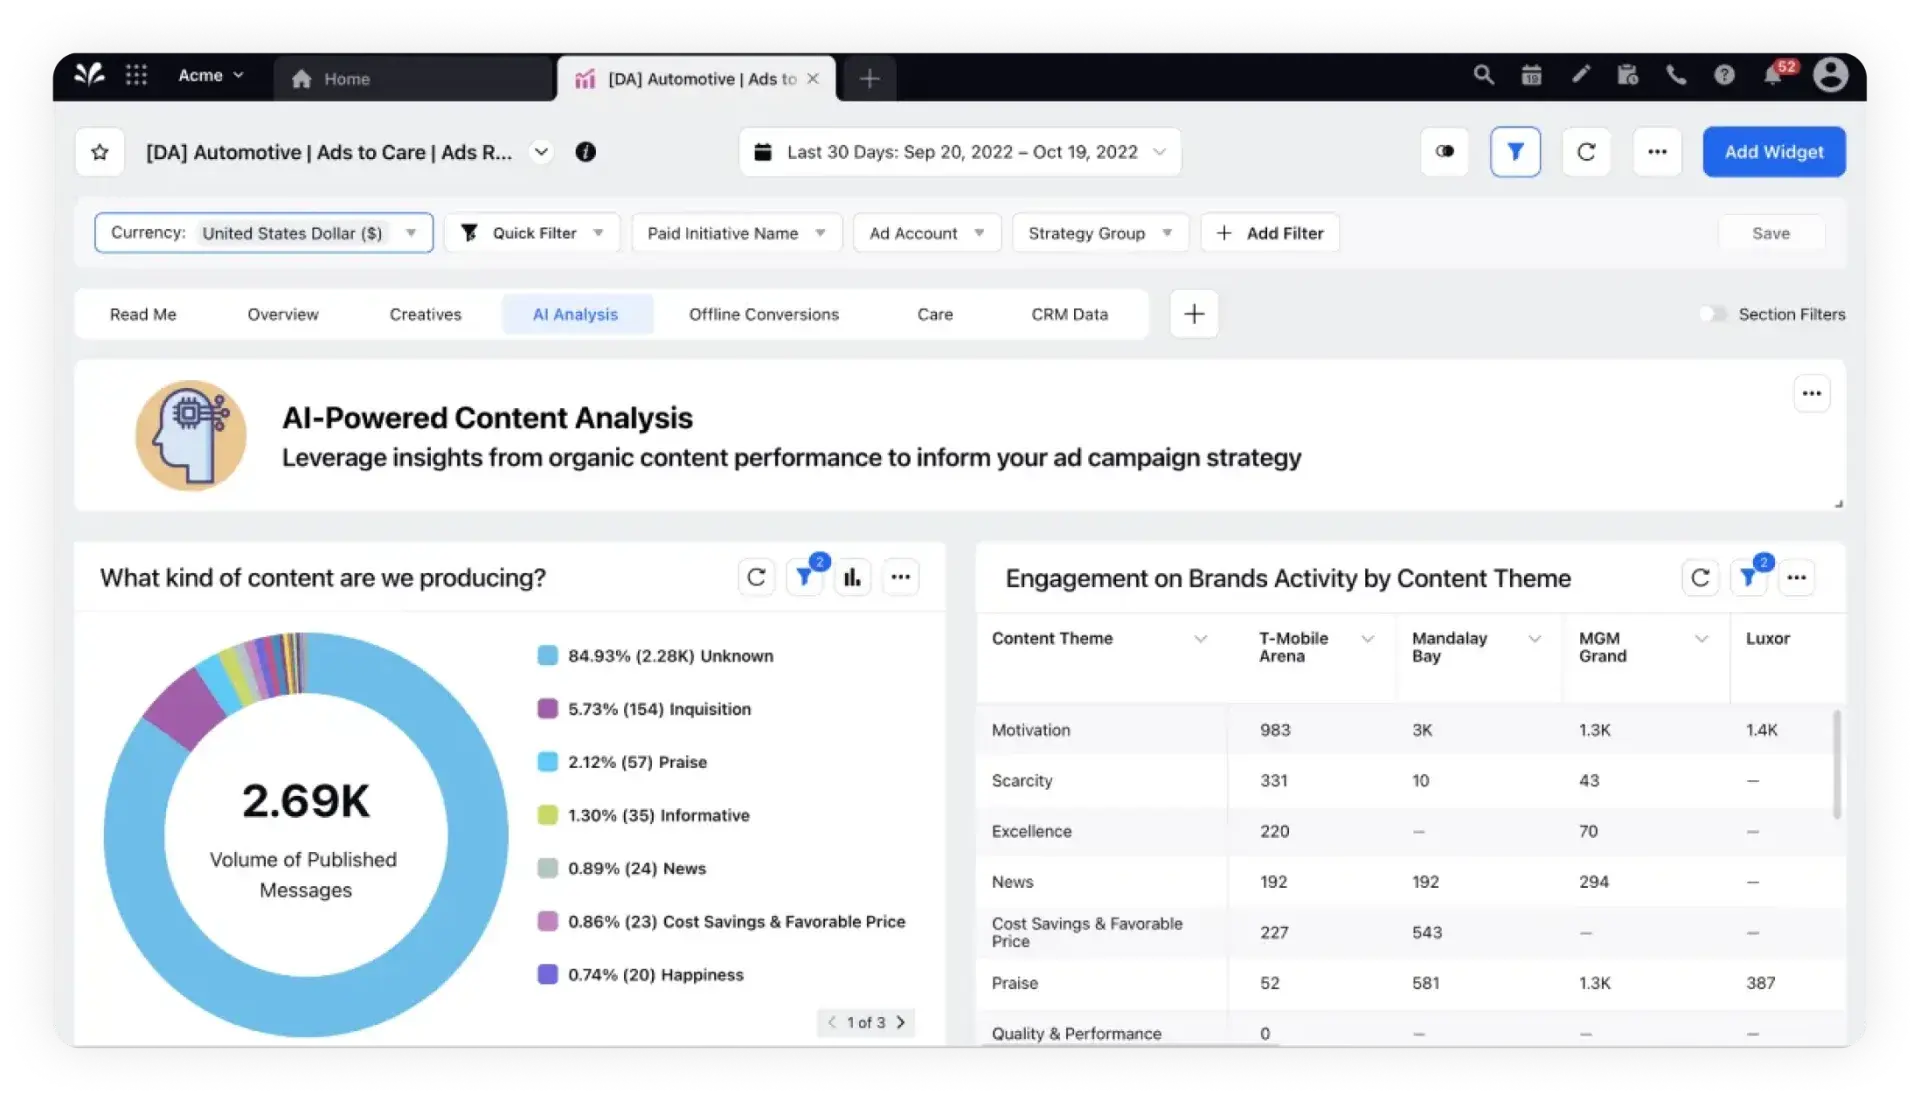 Sprinklr marketing and advertising dashboard for CPG brands